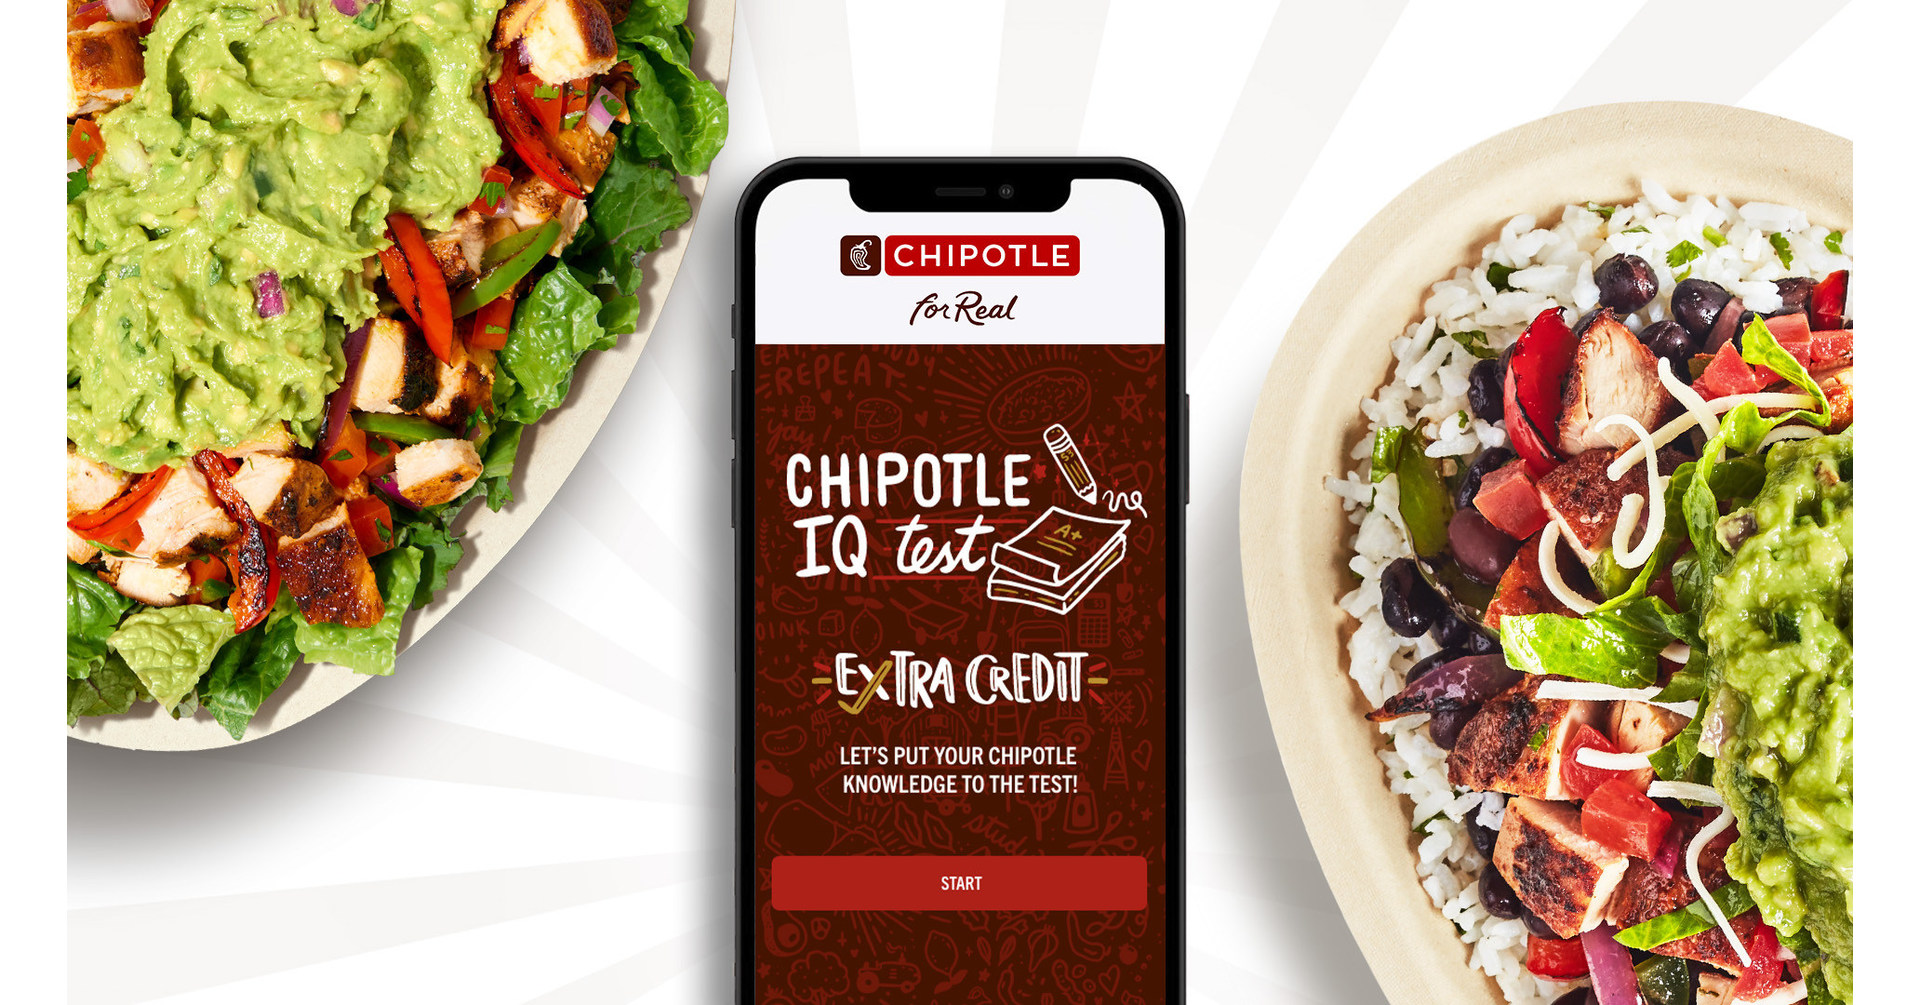 CHIPOTLE IQ IS BACK WITH 500,000 BOGOS FOR BRAND SCHOLARS